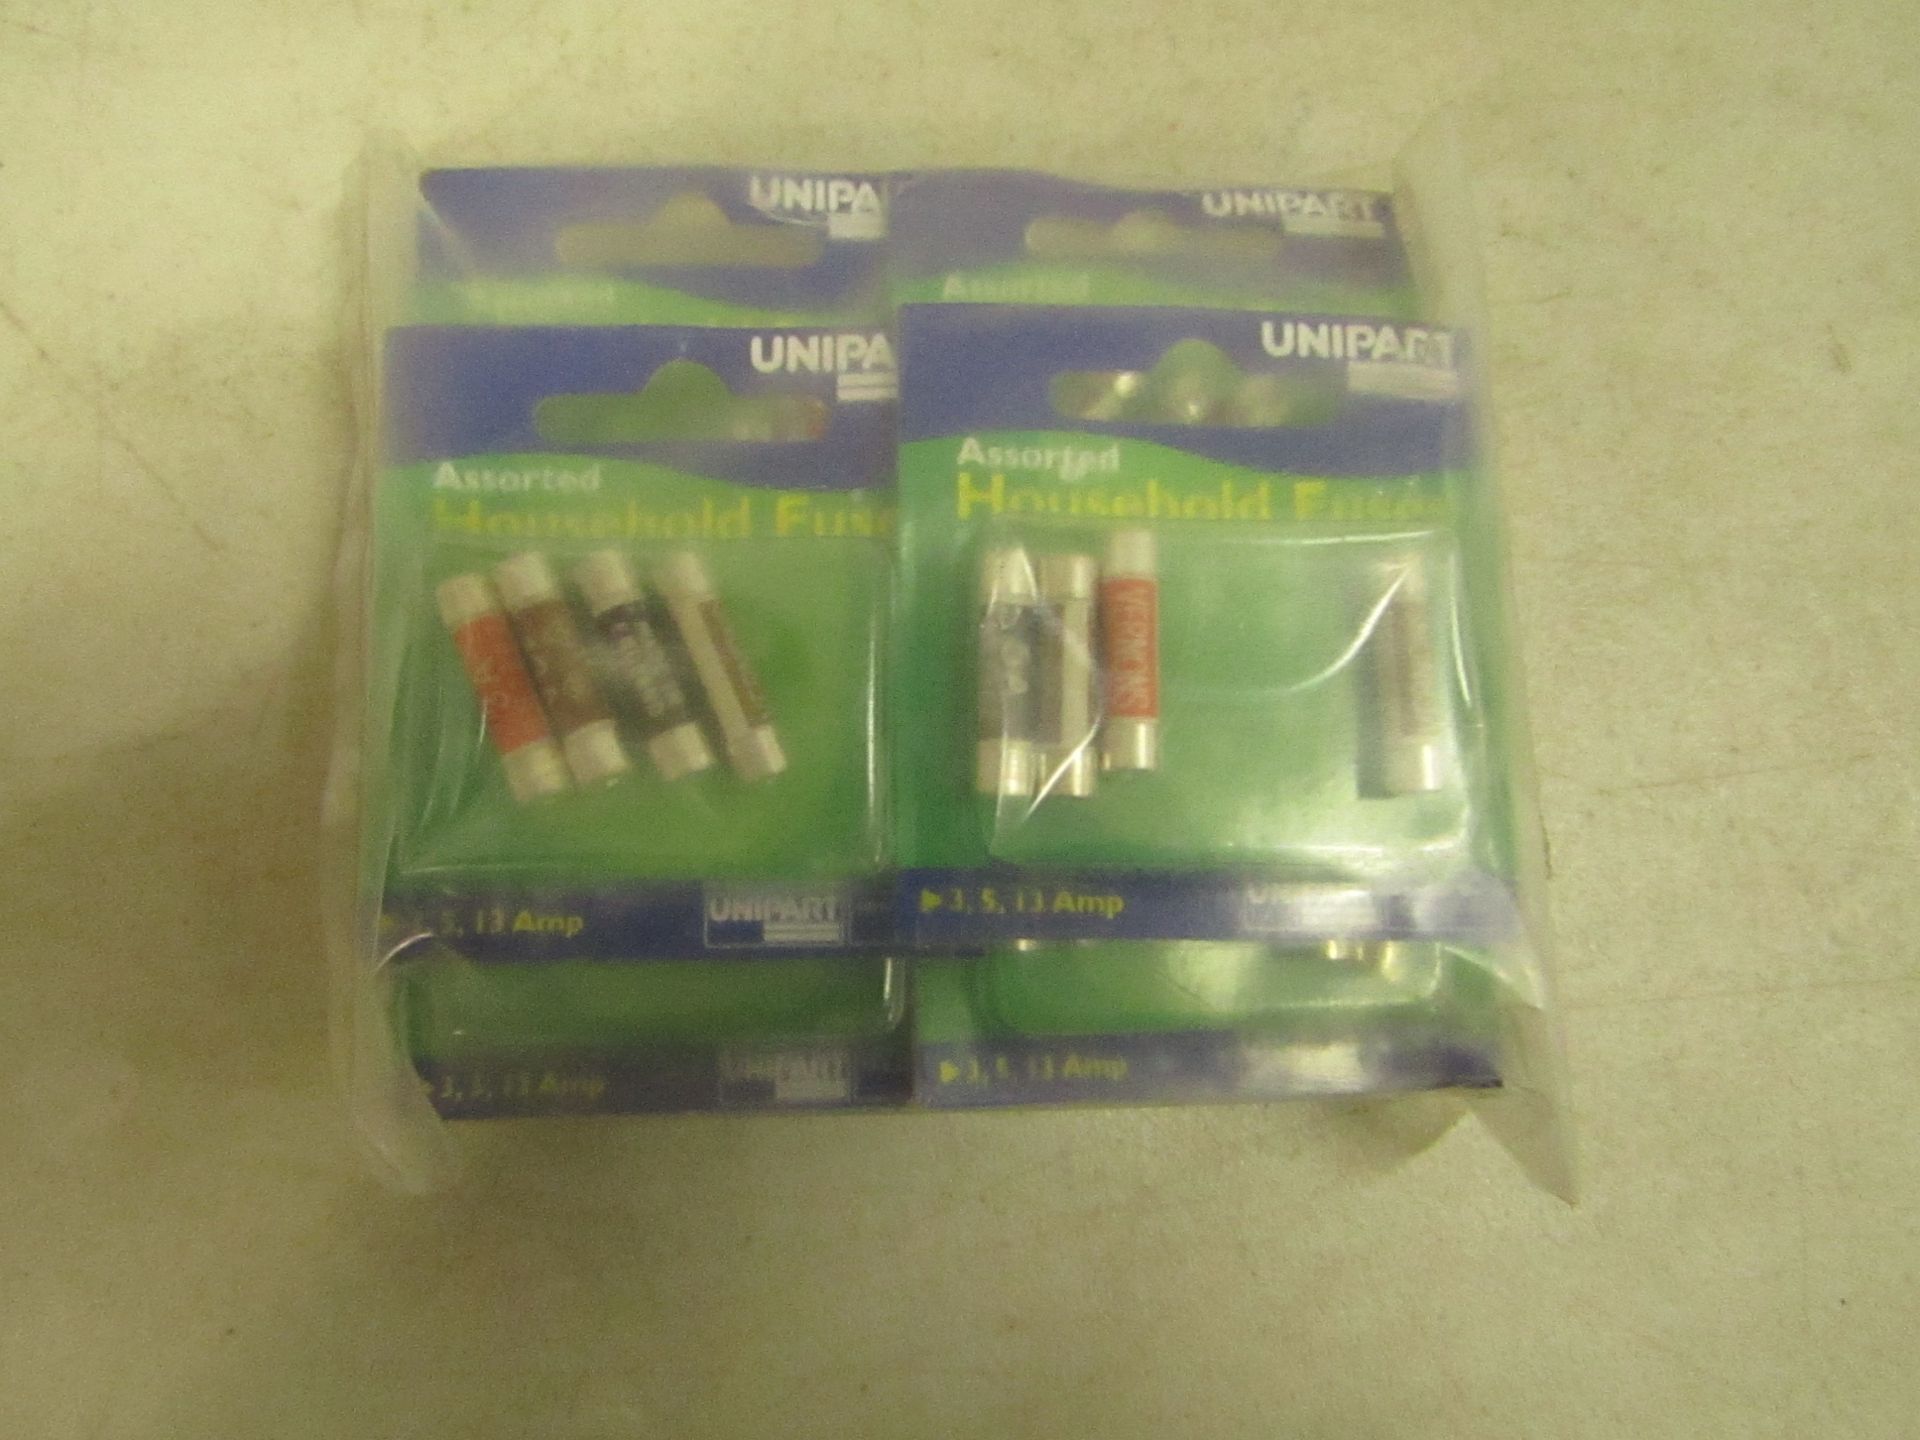 6x Packs of 4 Unipart assorted household fuses, new.